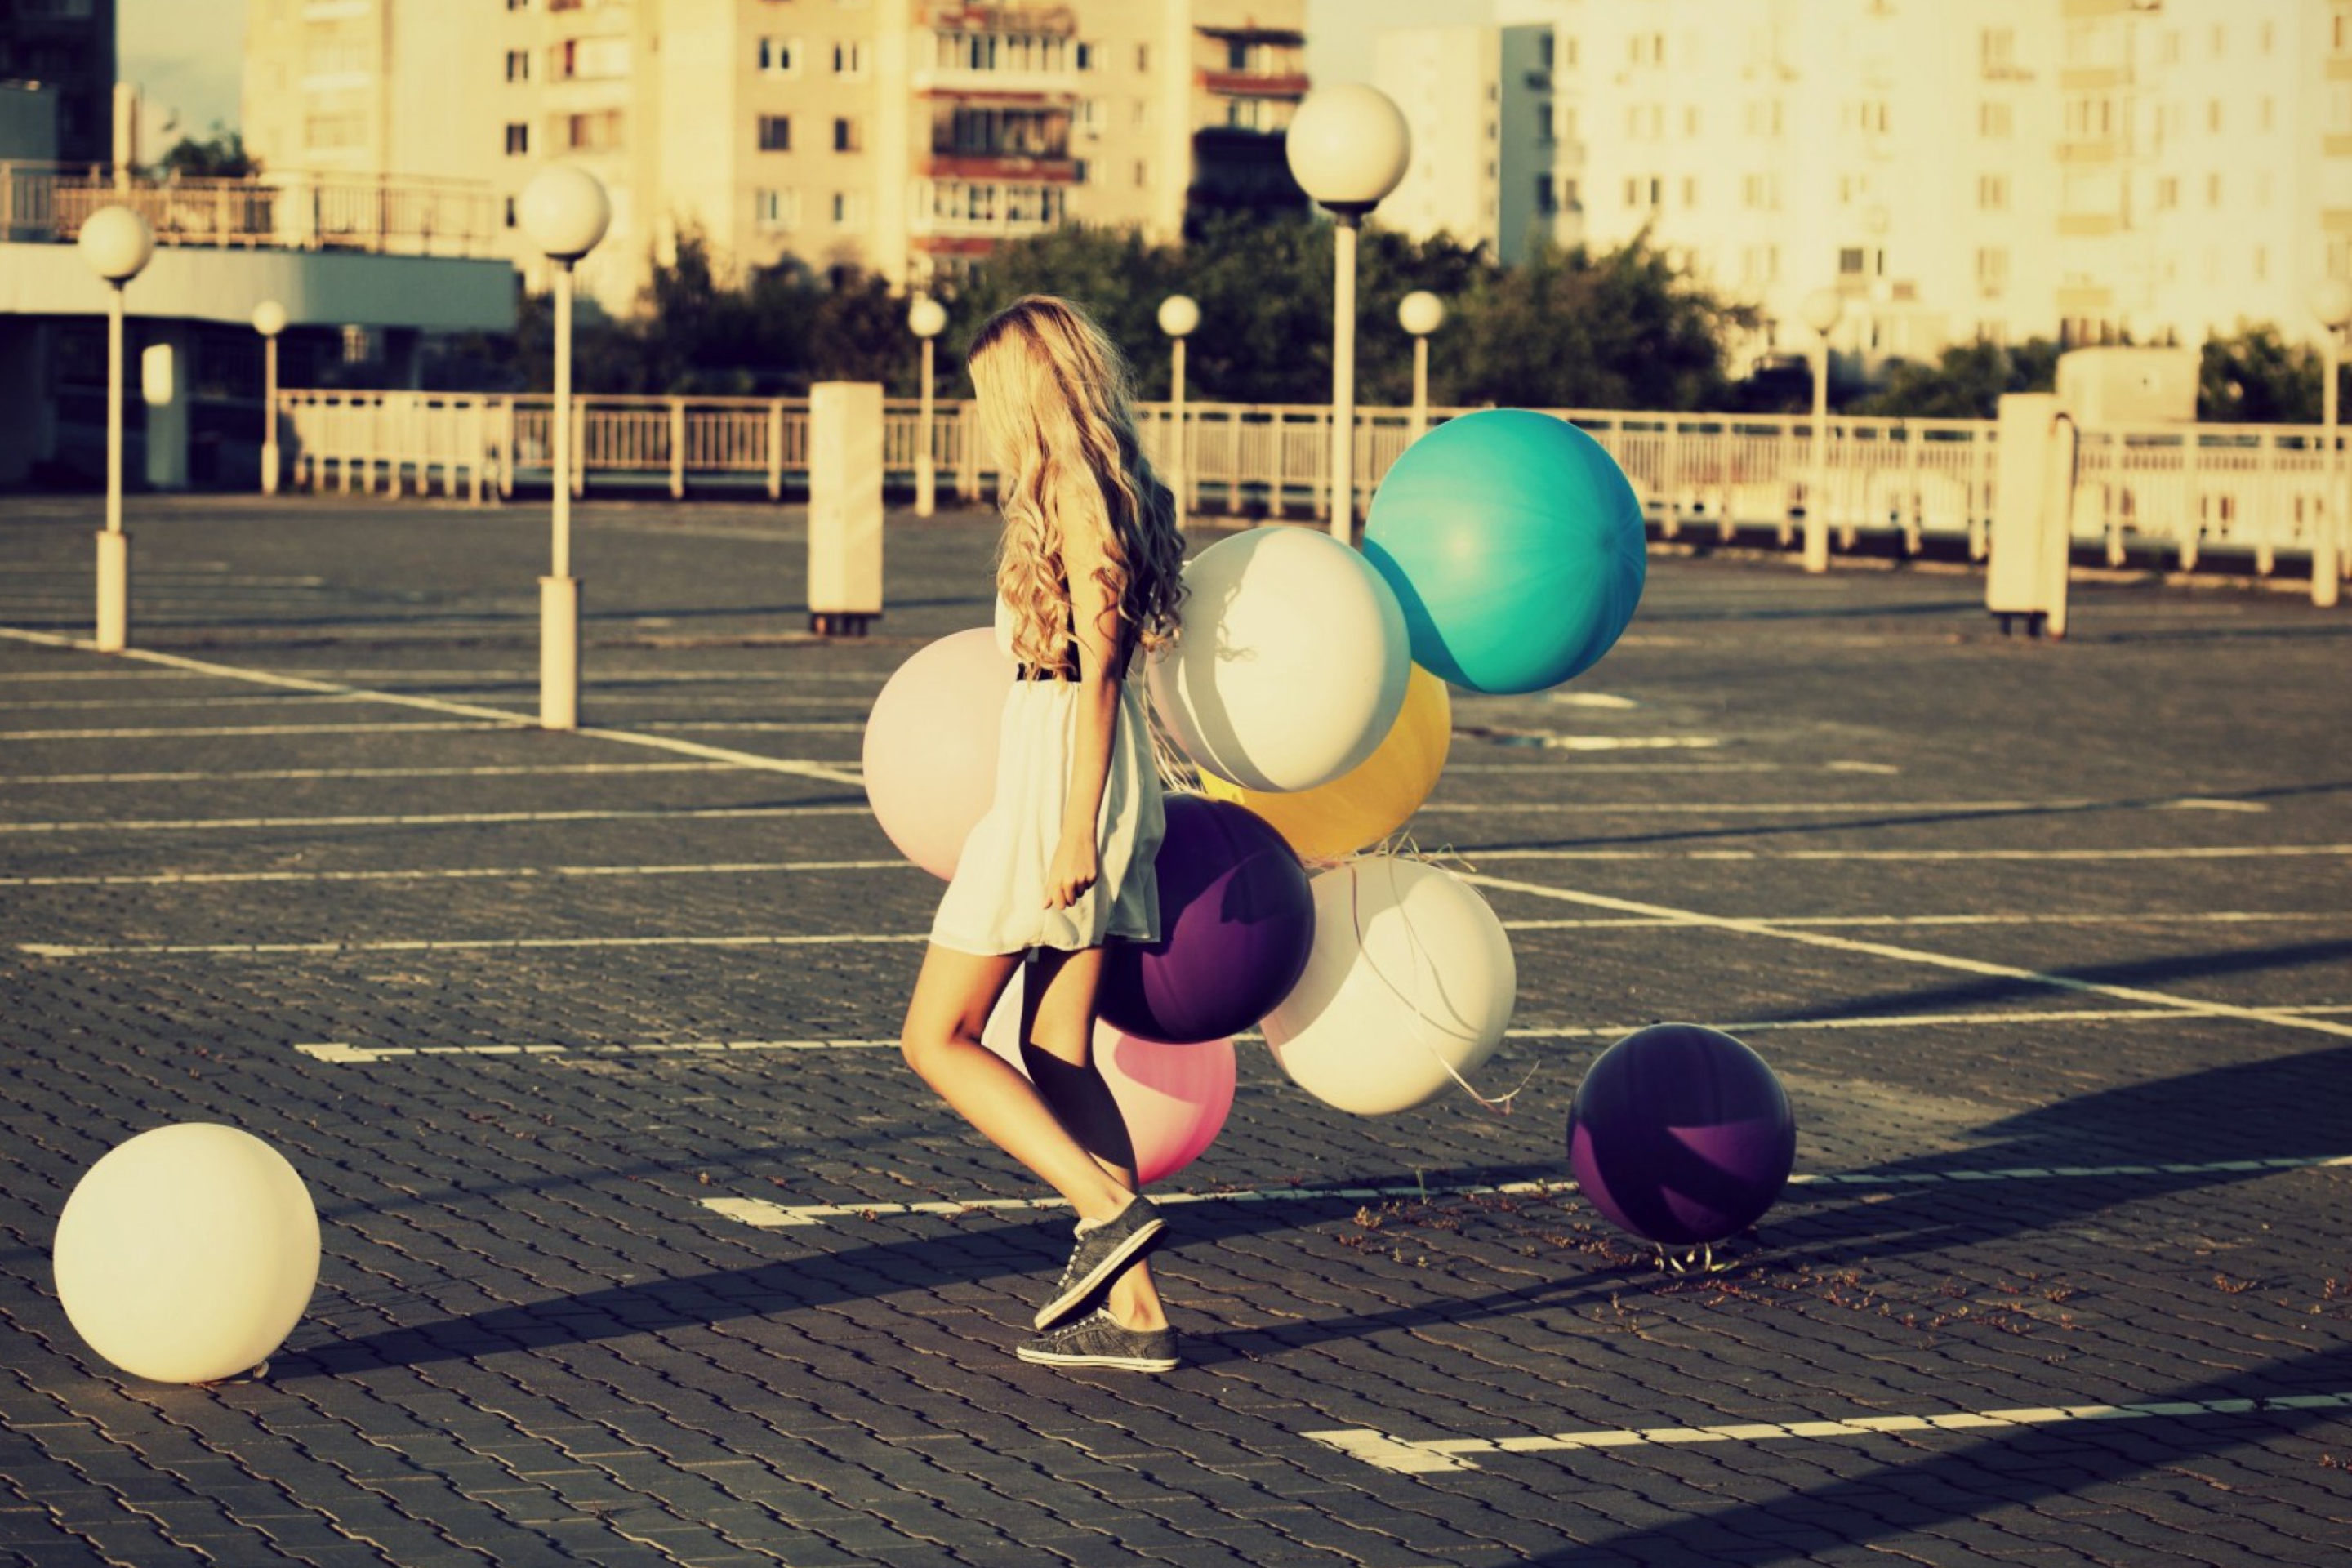 Happy Girl With Colorful Balloons wallpaper 2880x1920